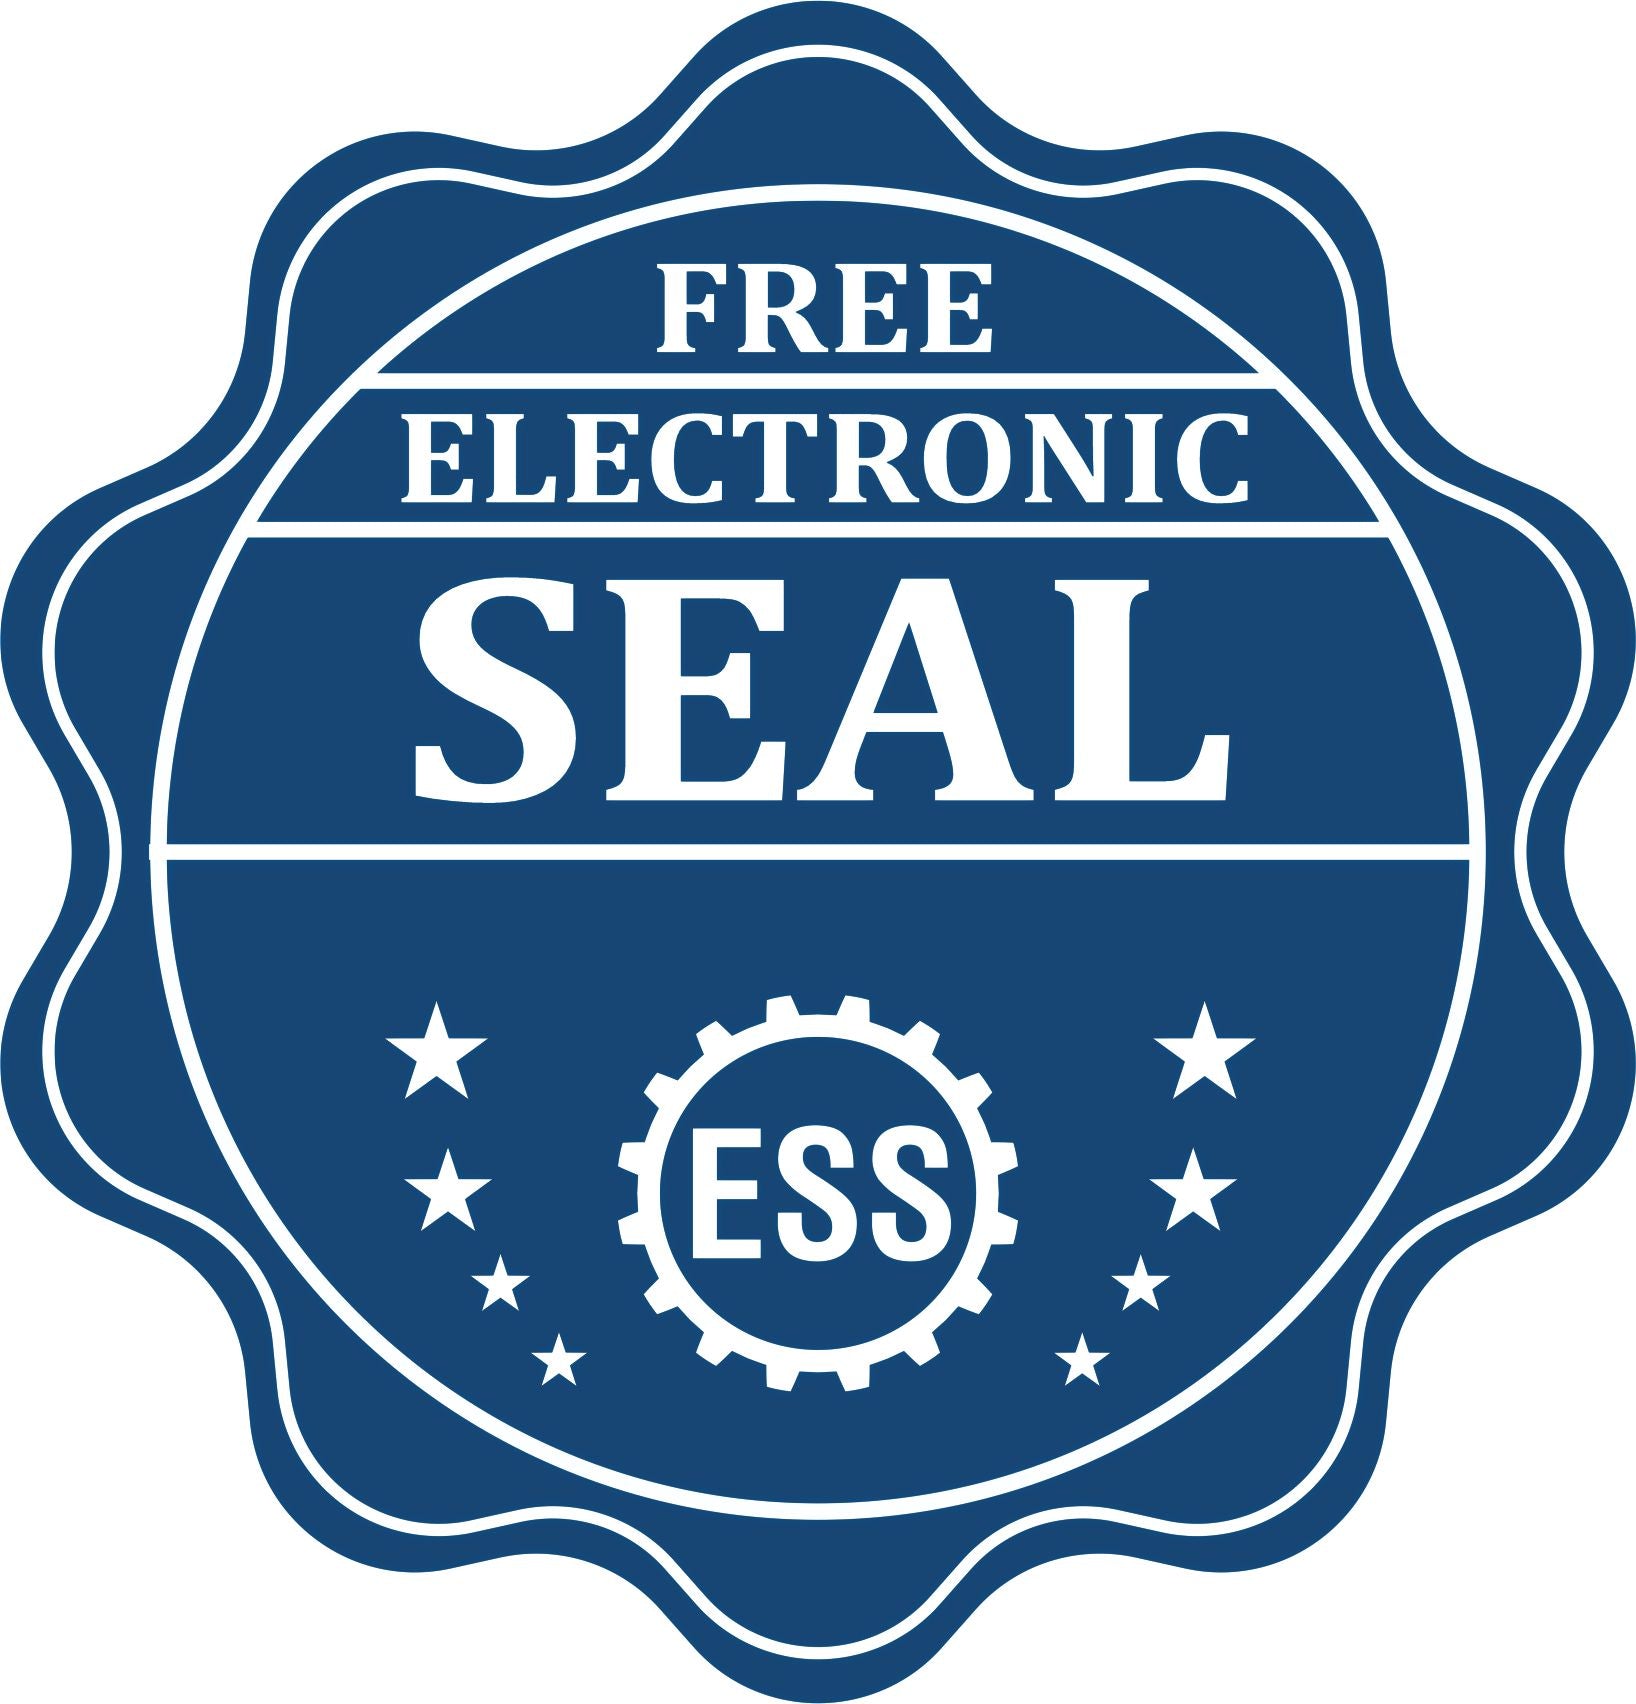 A badge showing a free electronic seal for the Montana Desk Surveyor Seal Embosser with stars and the ESS gear on the emblem.